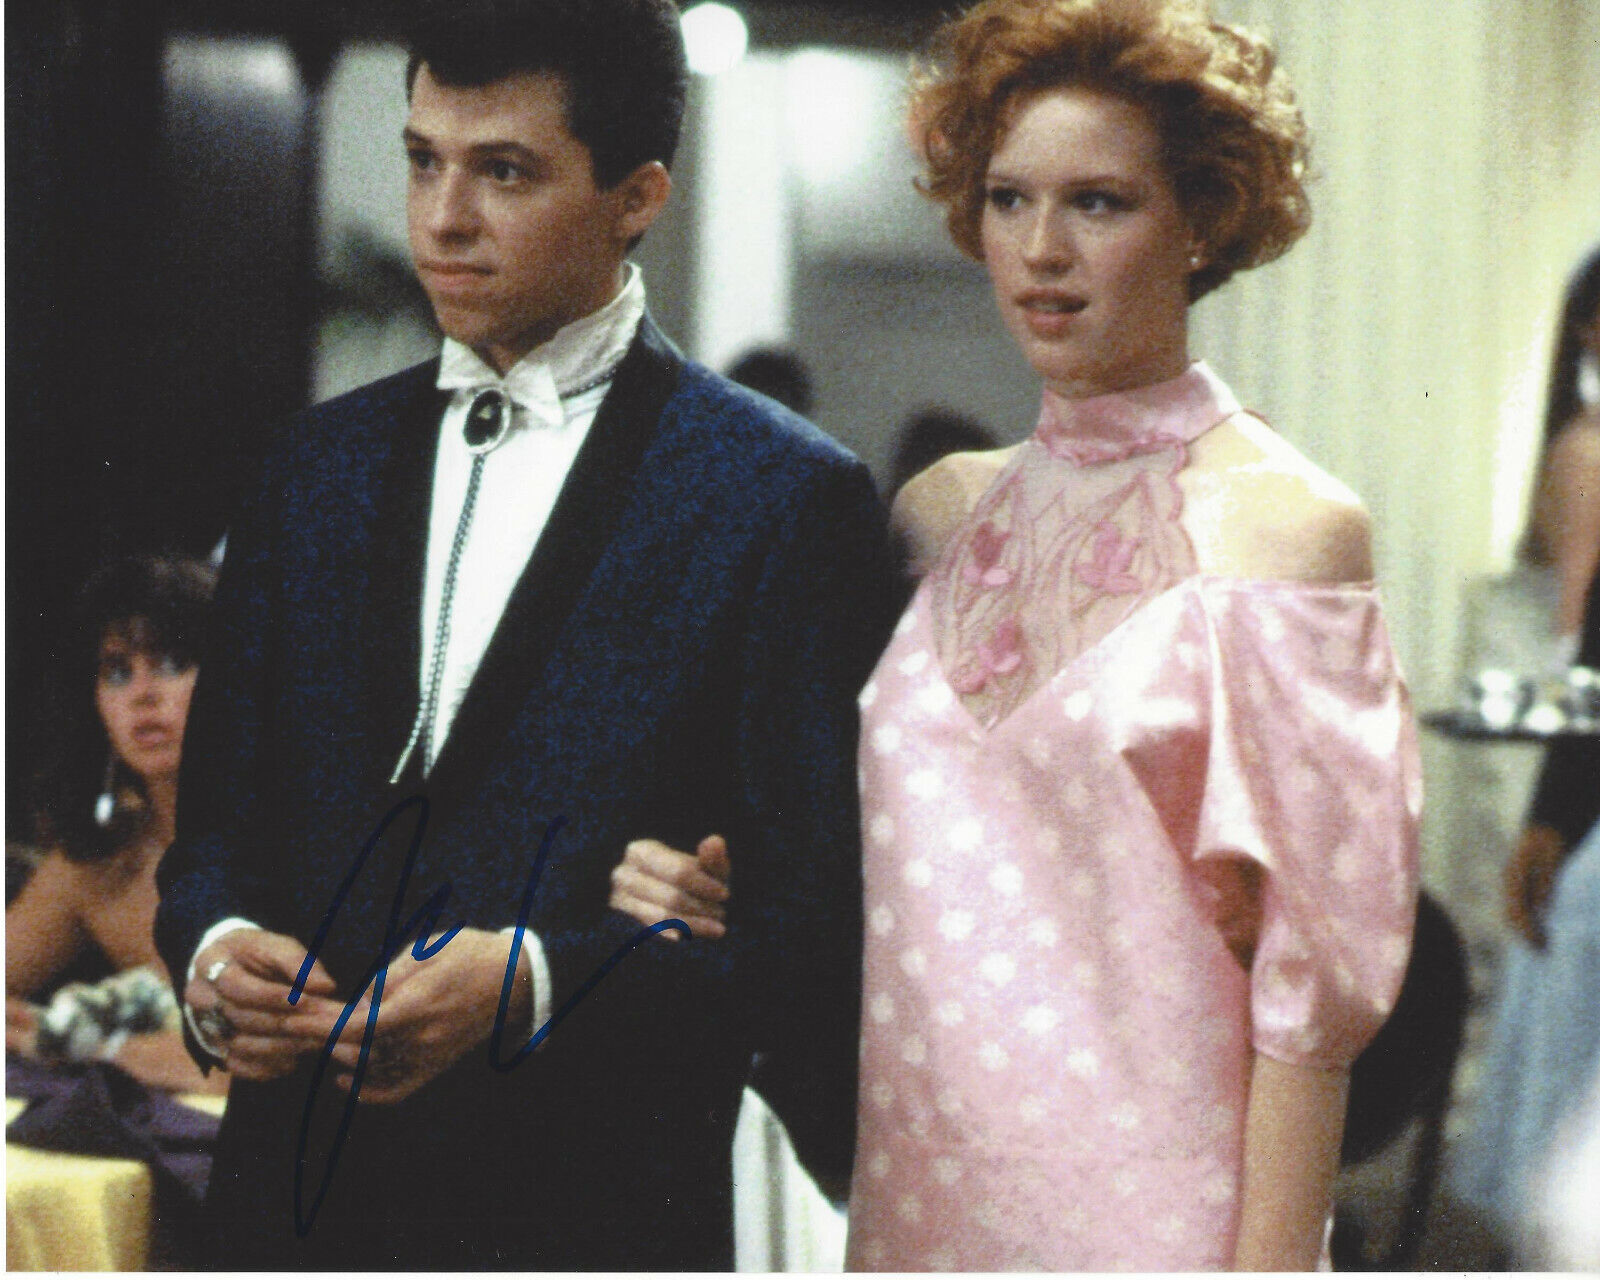 JON CRYER SIGNED AUTHENTIC 'PRETTY IN PINK' 8X10 Photo Poster painting C w/COA ACTOR SUPERMAN IV